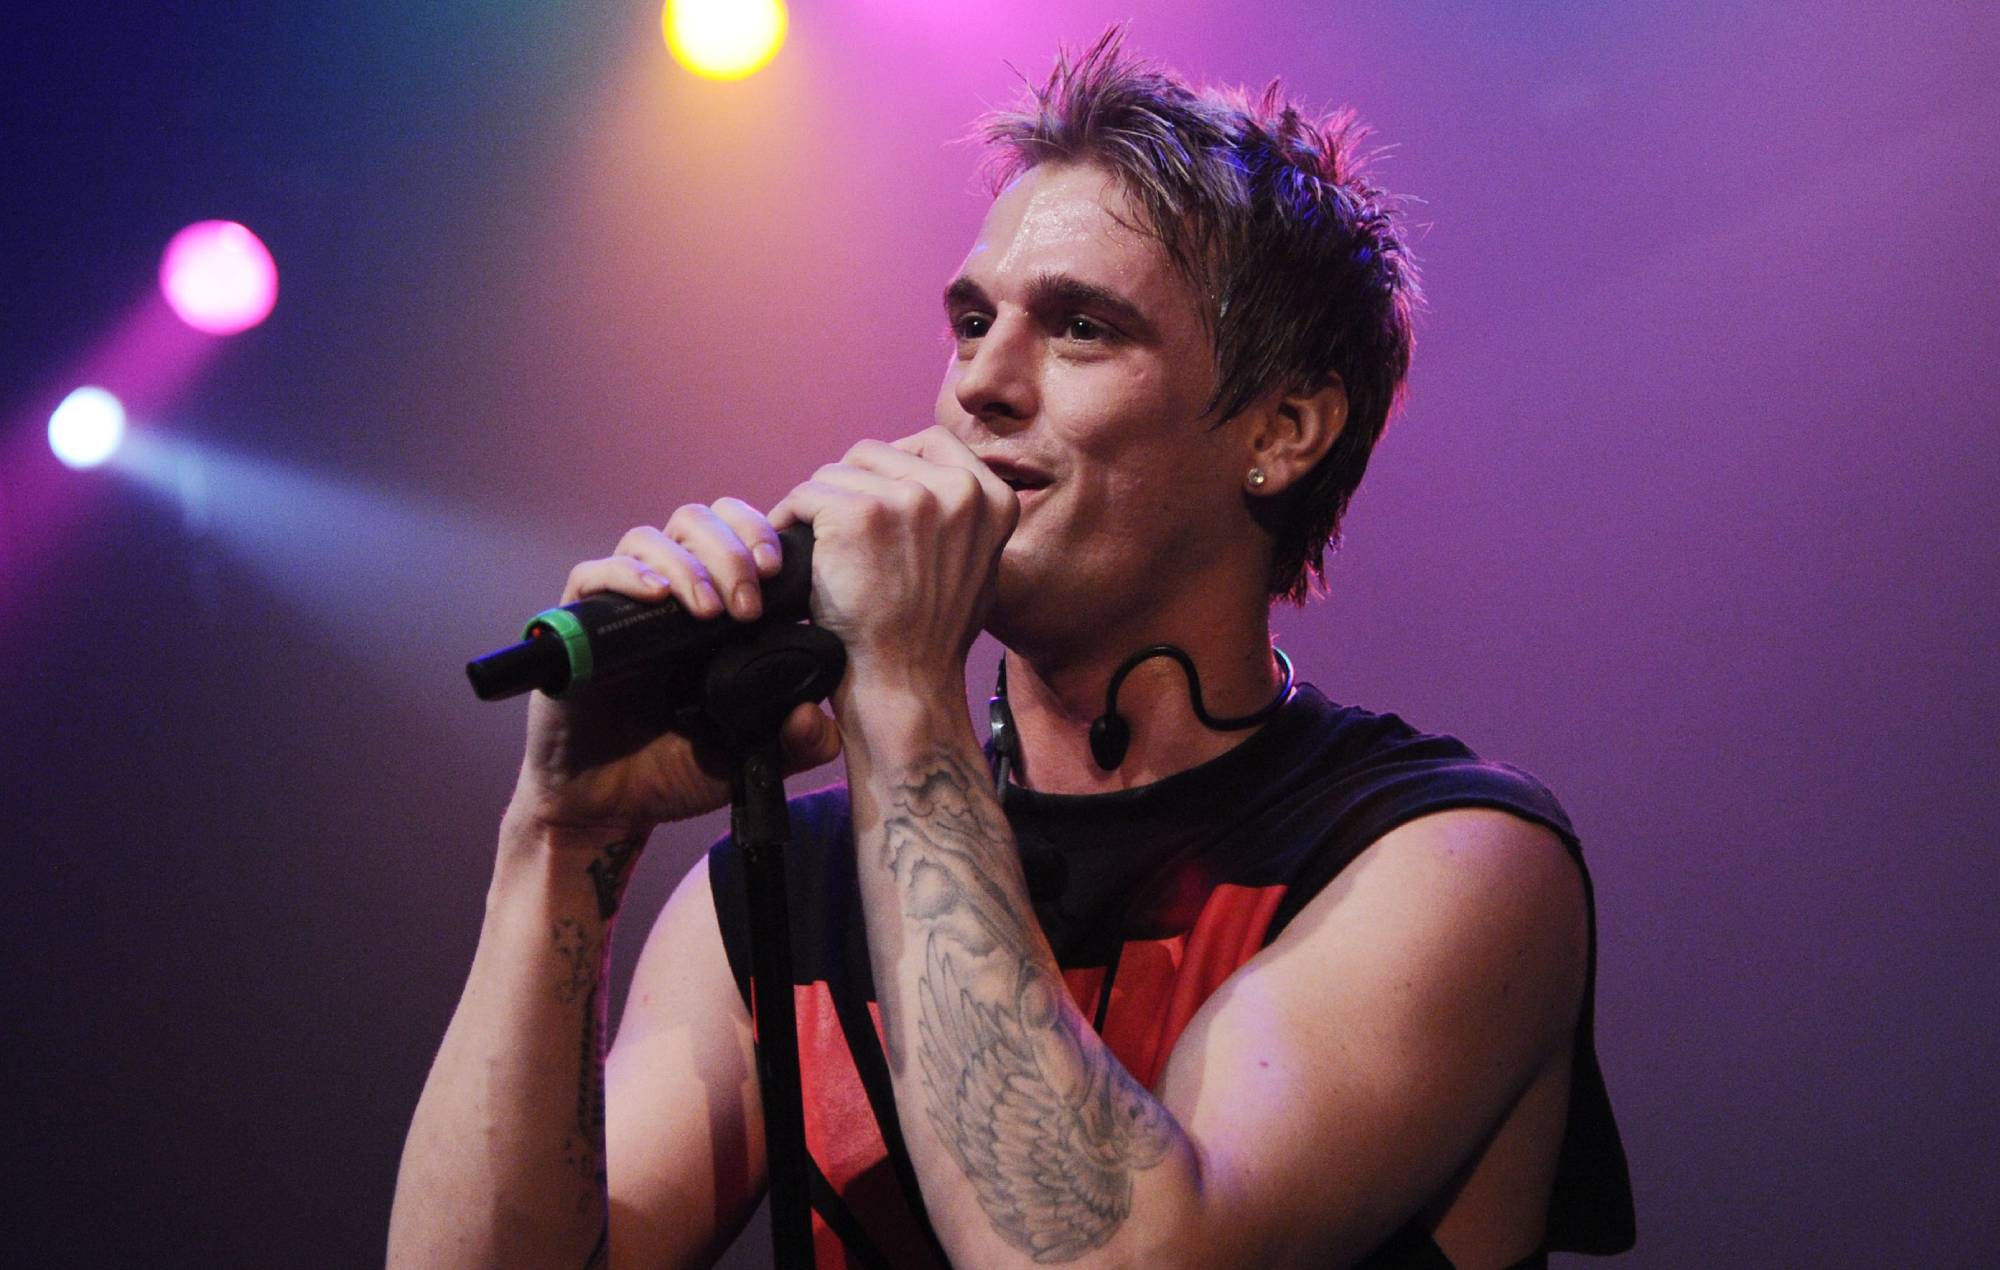 Aaron Carter’s family to sue doctors and pharmacies over his death